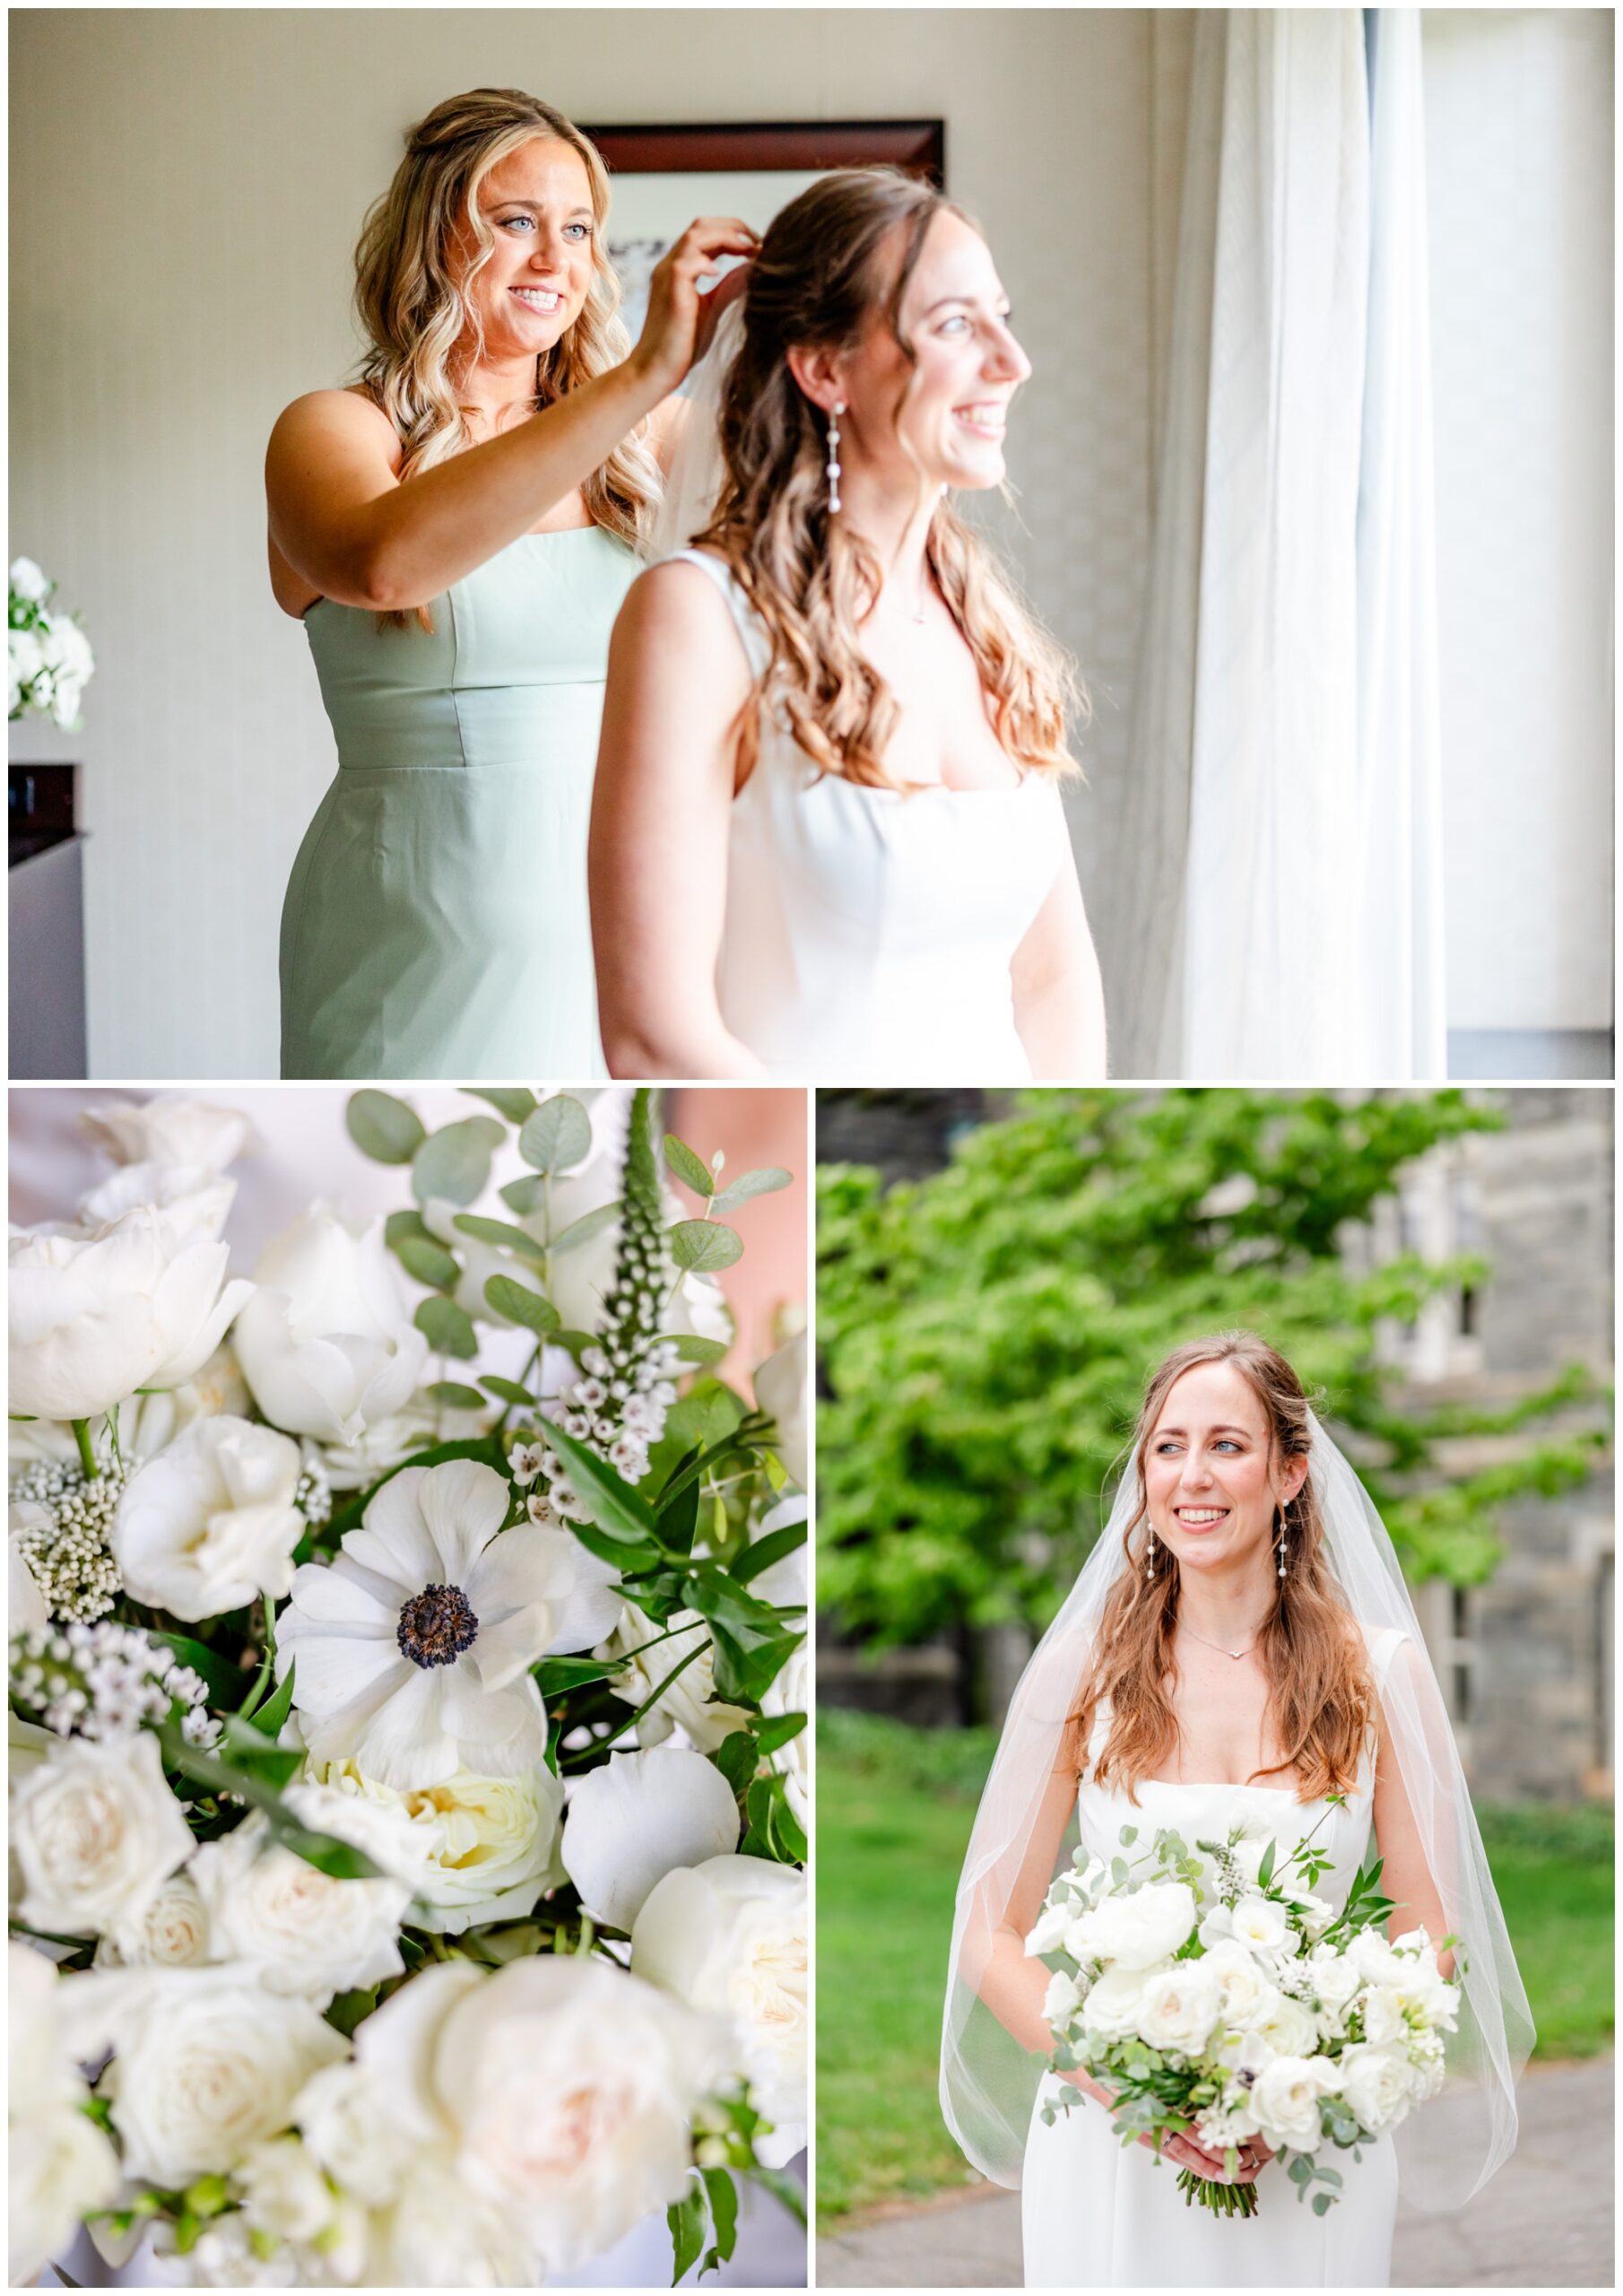 Washington D.C. summer wedding, Toolbox Washington D.C., Dupont Circle wedding venue, summer wedding aesthetic, summer wedding portraits, sage green aesthetic, Washington D.C. wedding photography, D.C. wedding photographer, Rachel E.H. Photography, Georgetown University portraits, Georgetown portraits, bridesmaid helping bride with hair, white bouquet, bride smiling in different direction, Bee Inspired Events bouquet